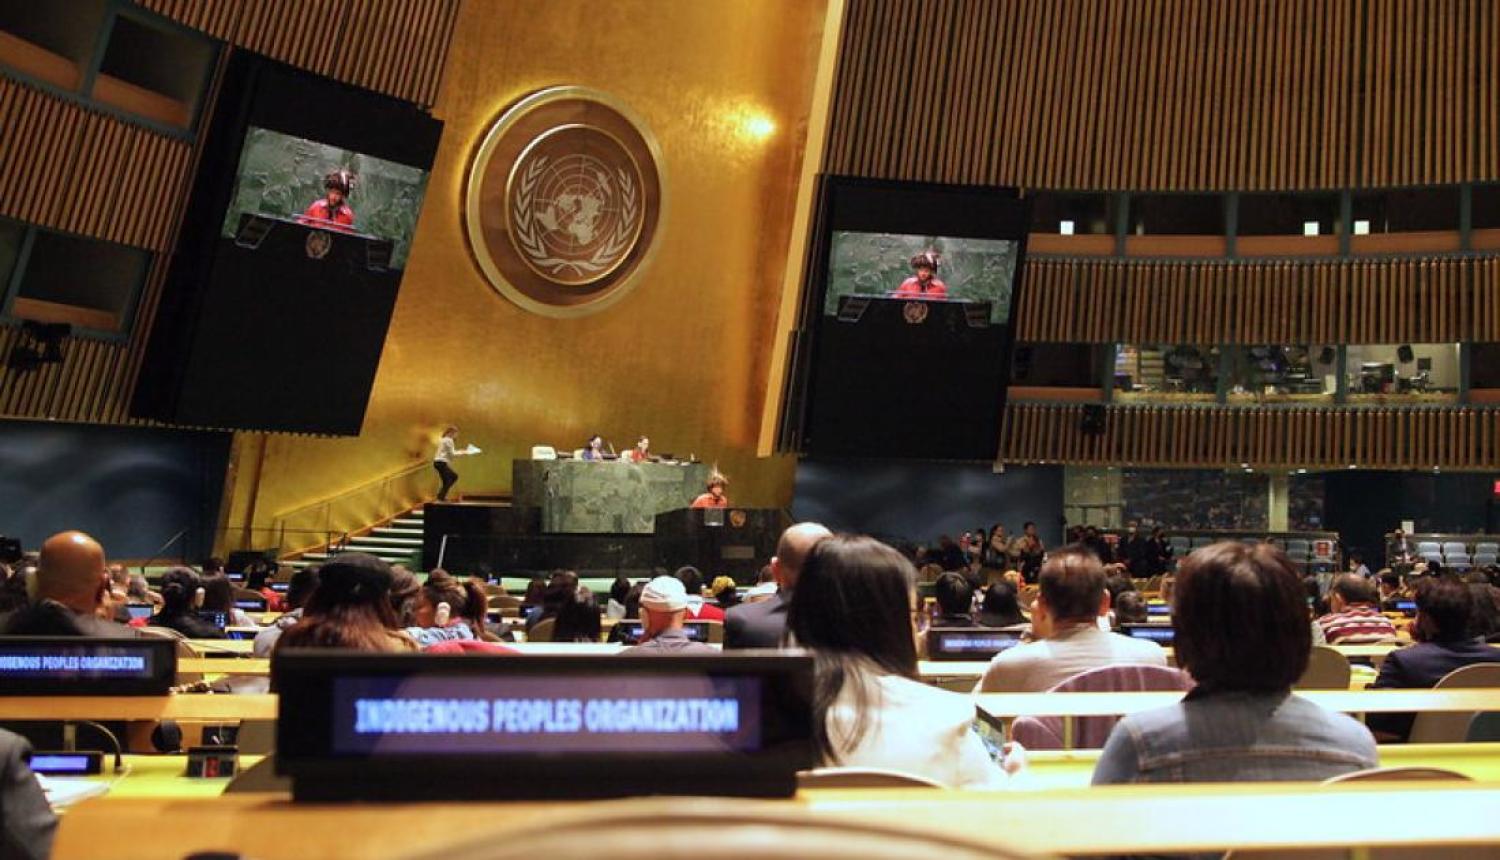 The upcoming session of the UN Permanent Forum on Indigenous Issues in New York in April will be an early opportunity to set the tone of the ambassador’s engagement with Indigenous Australians as well as with foreign counterparts (UN Photo)